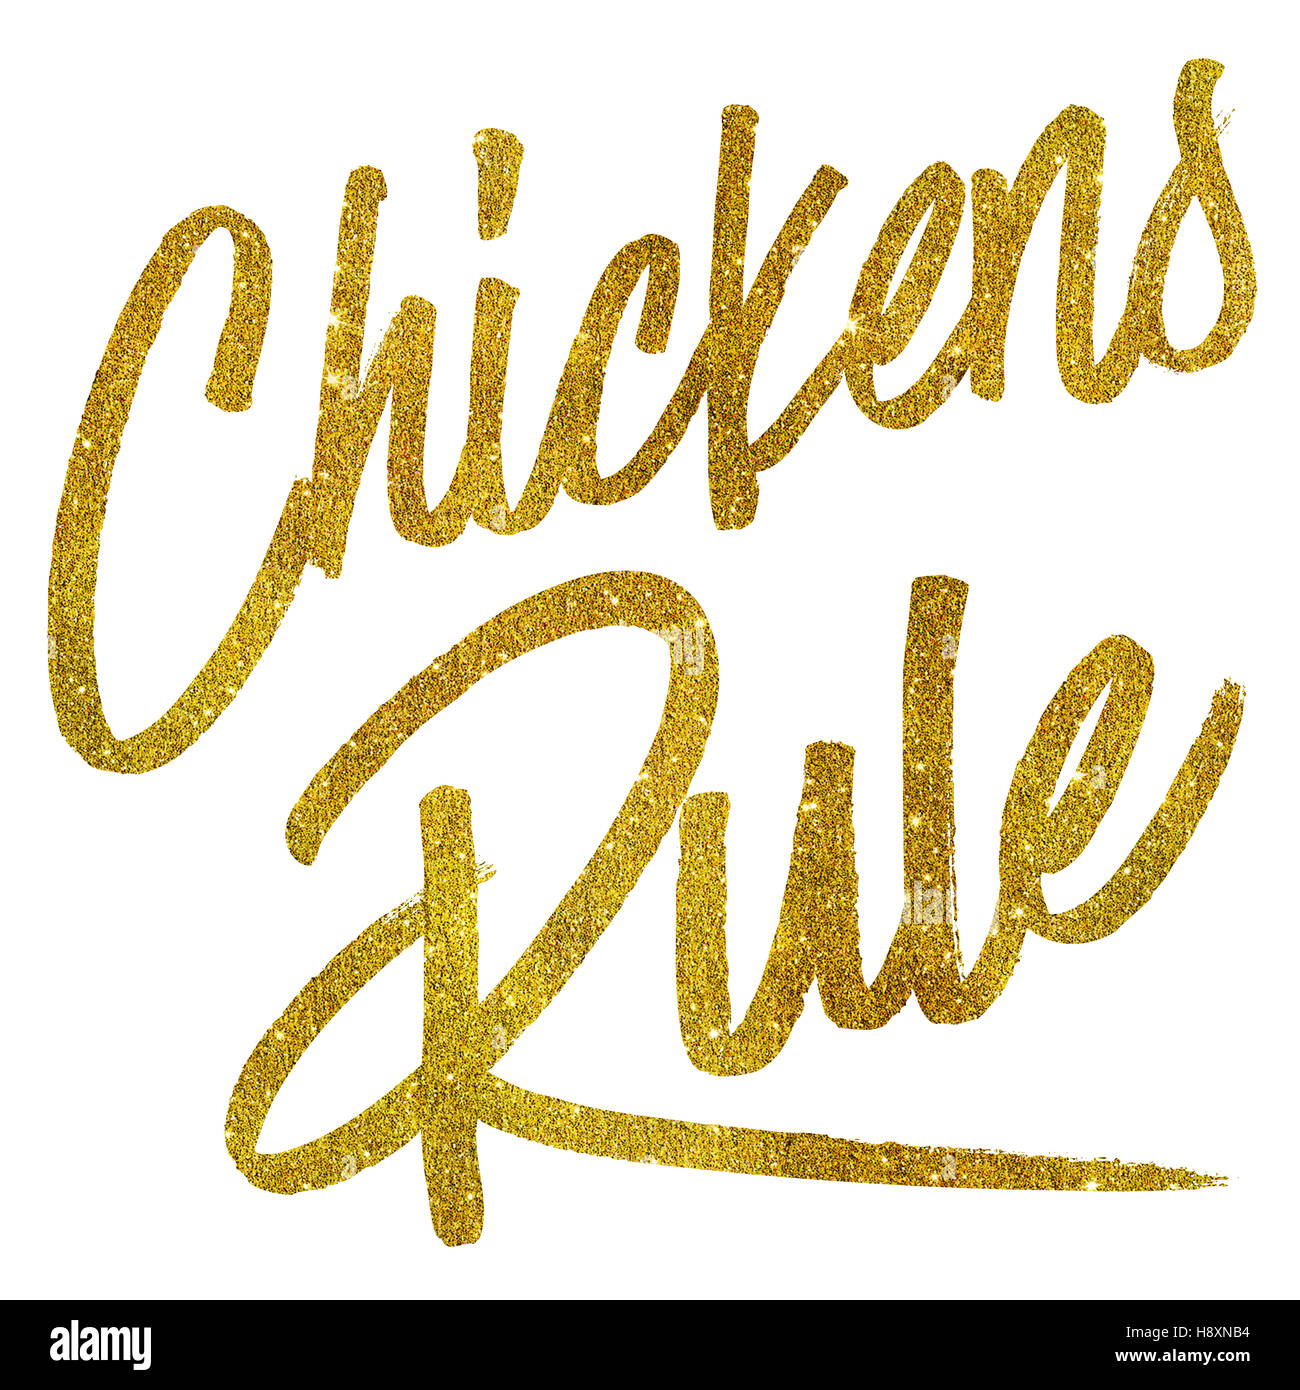 Chickens Rule Gold Faux Foil Metallic Glitter Quote Isolated Stock Photo